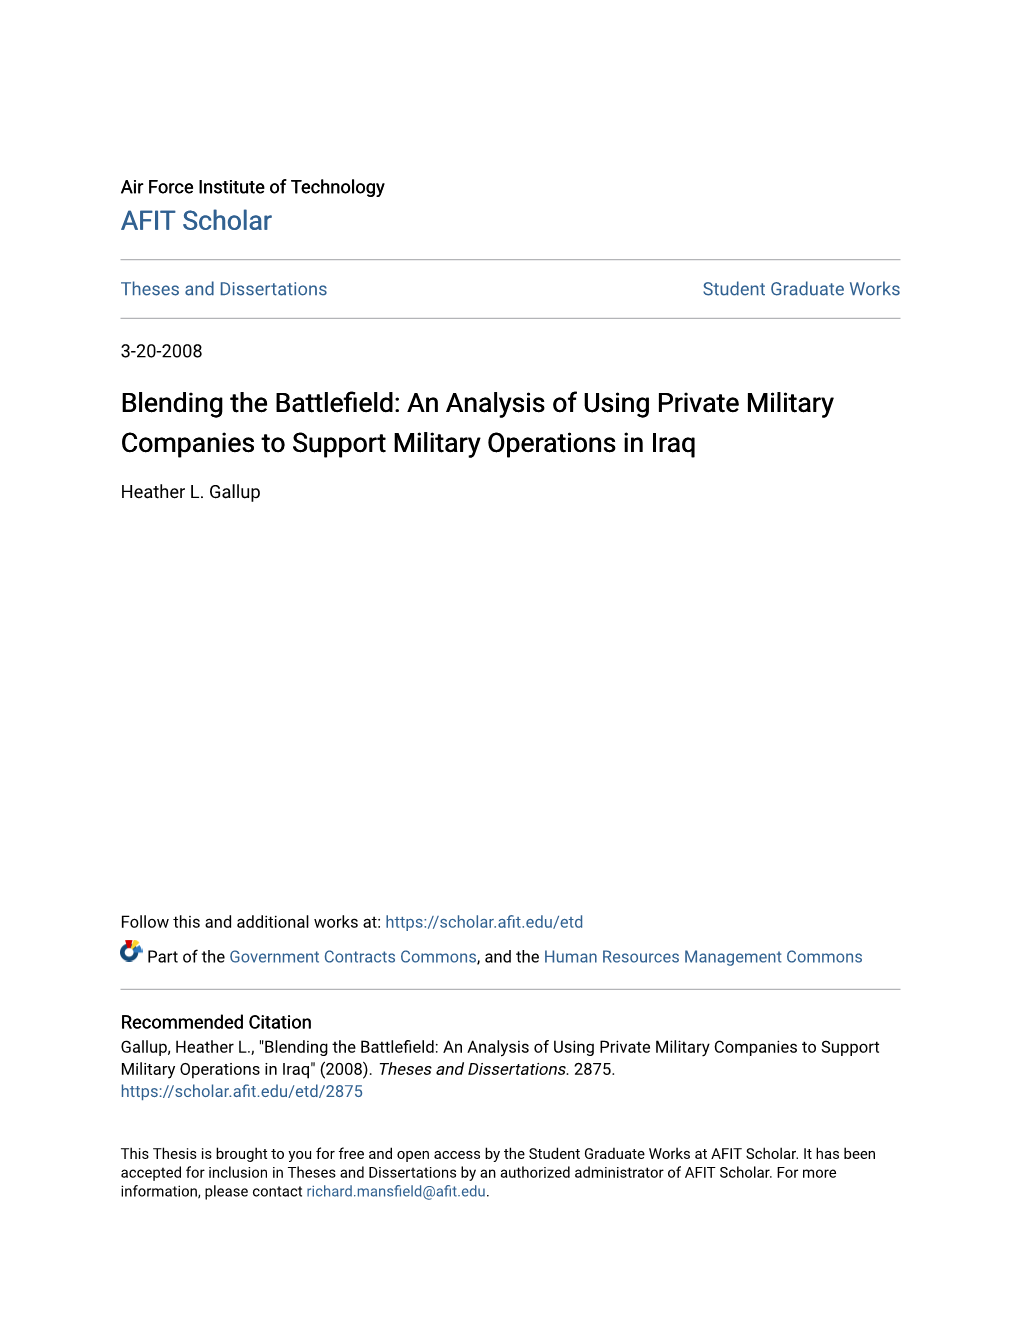 An Analysis of Using Private Military Companies to Support Military Operations in Iraq